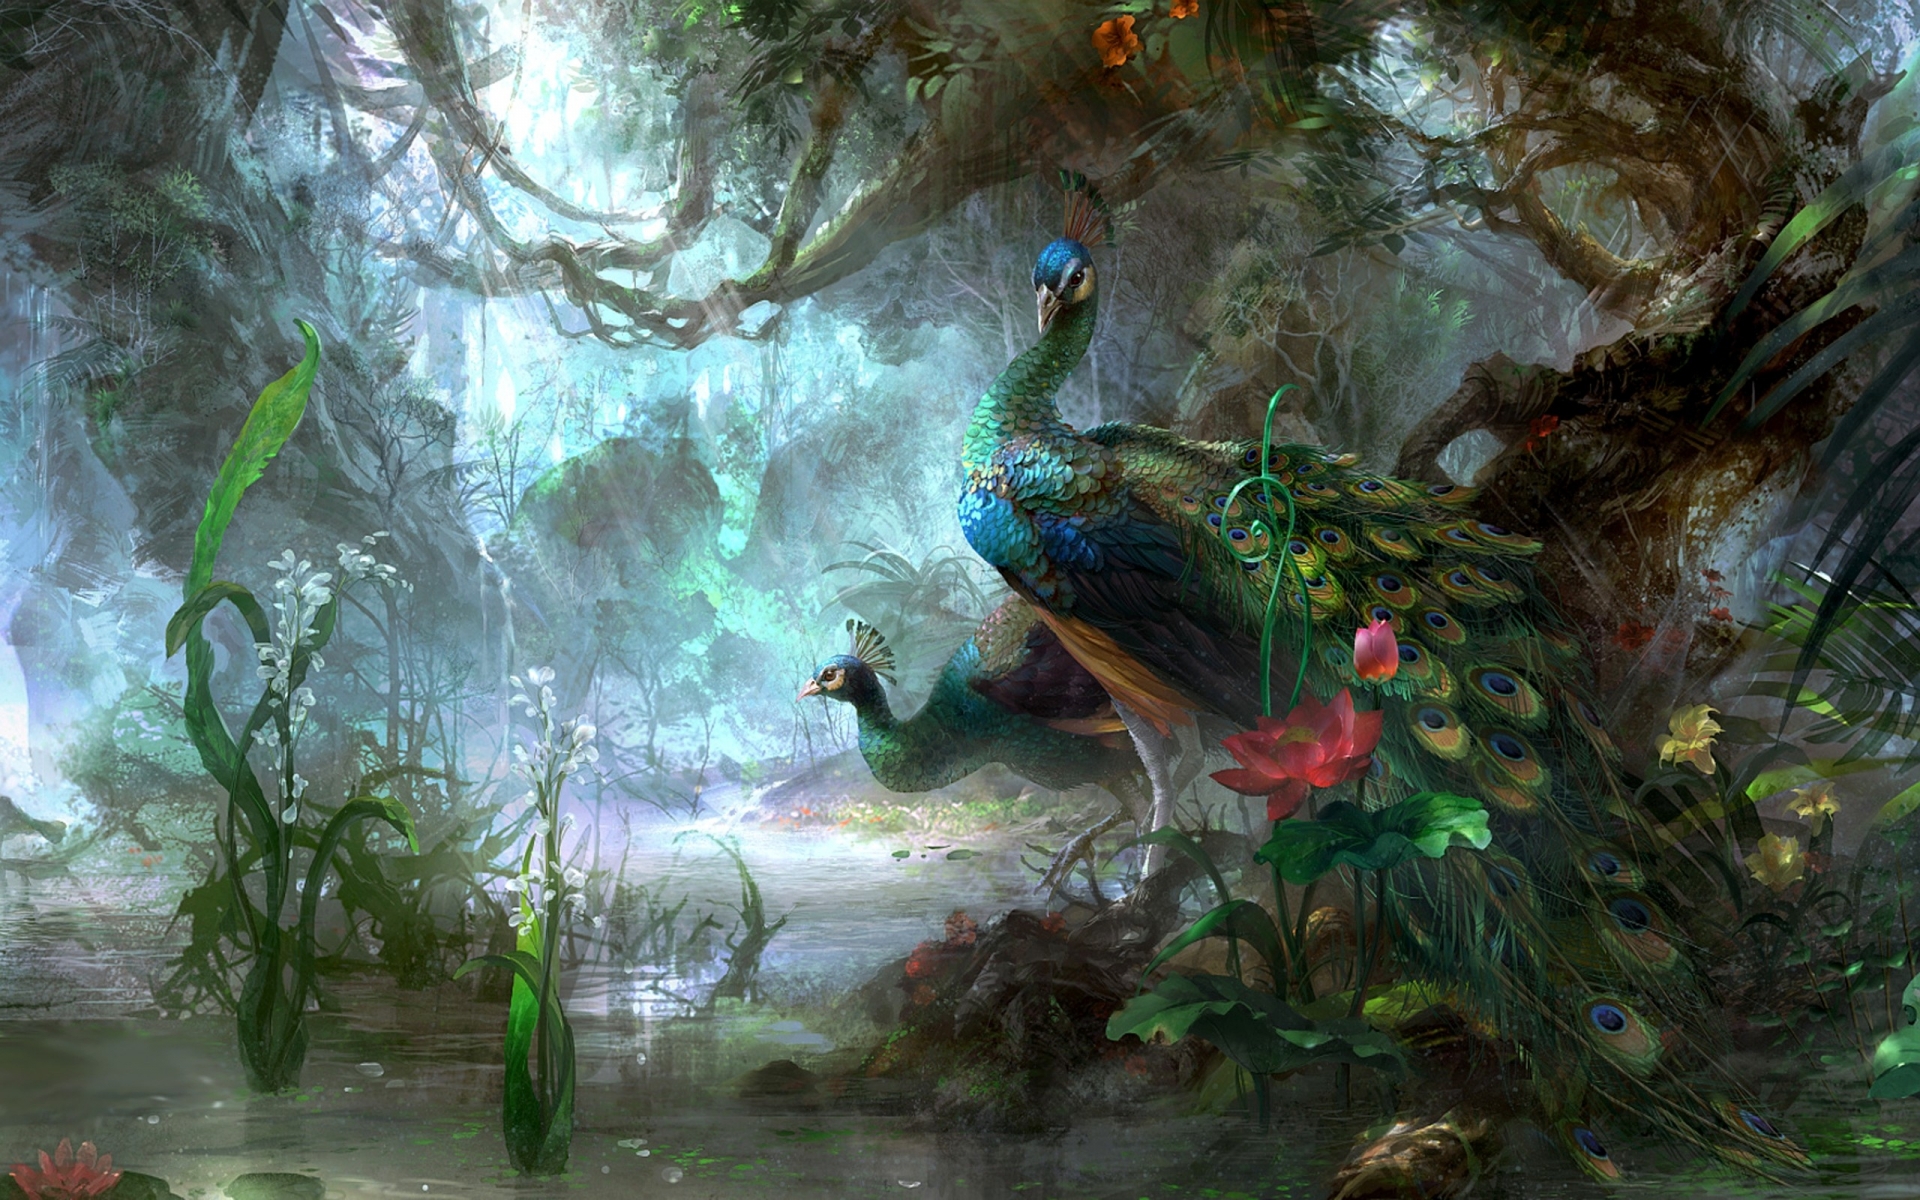  animals magical peacock jungle lake pond water moss flowers wallpaper 1920x1200